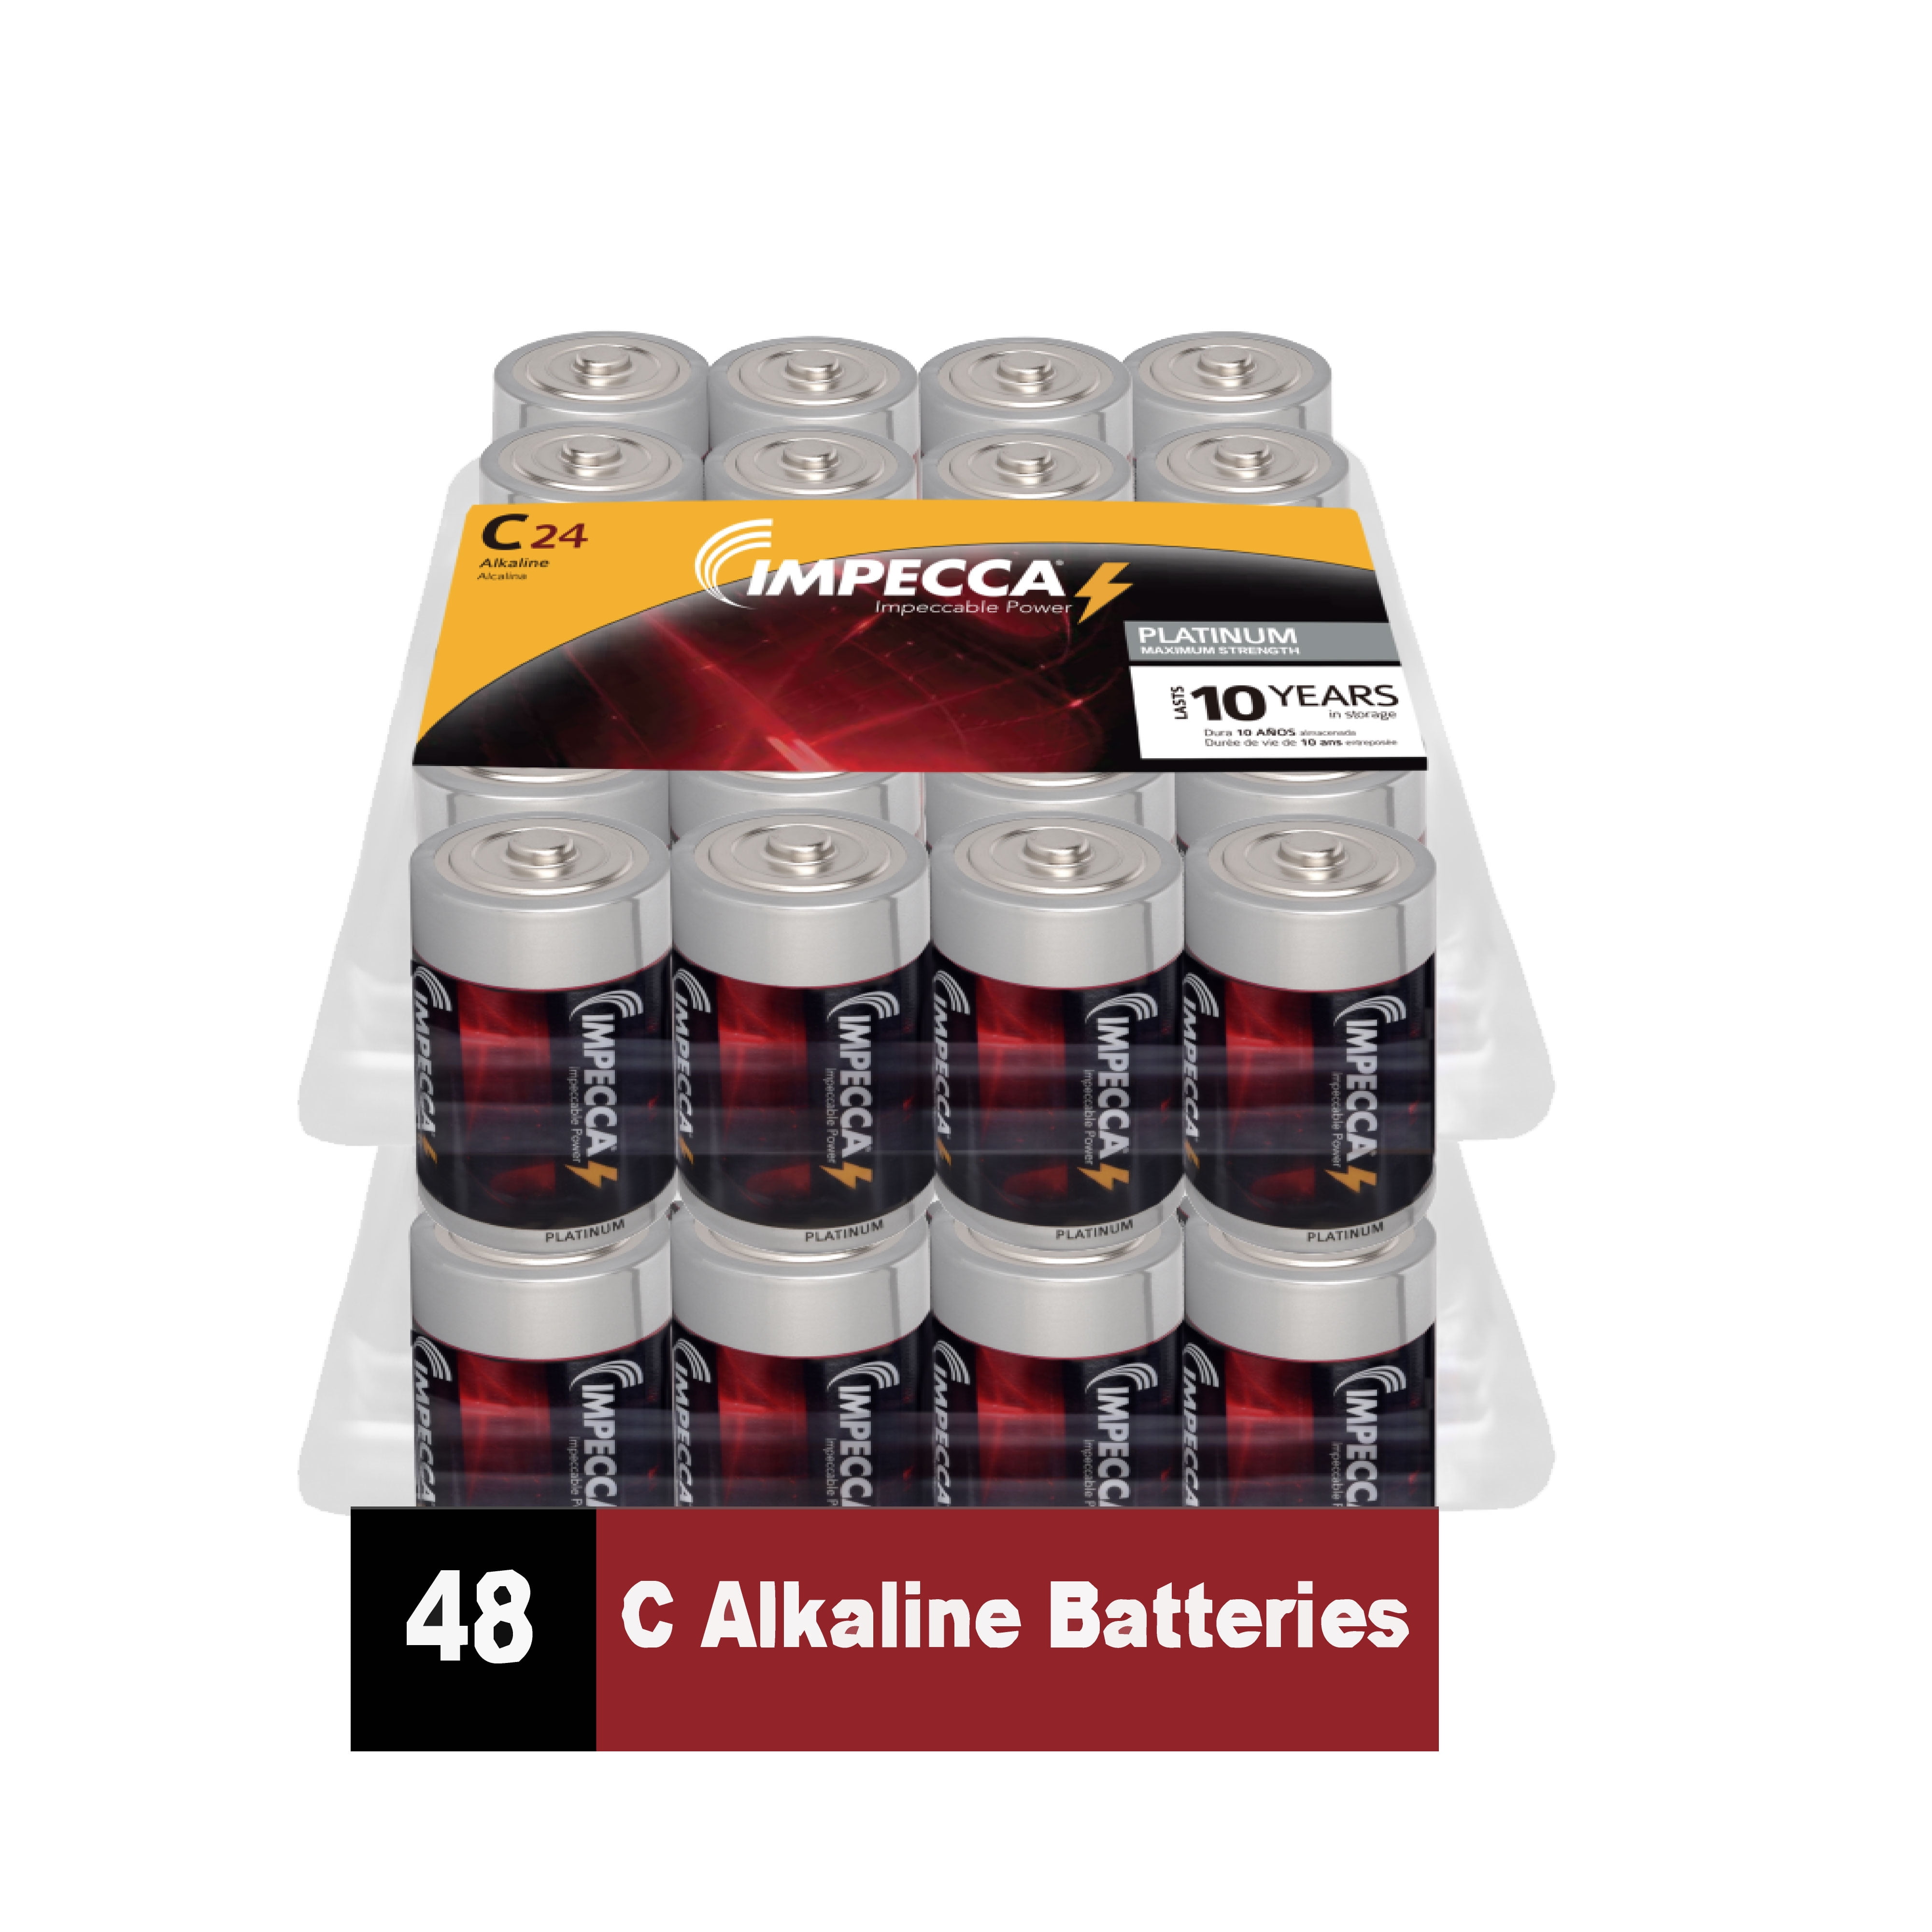 High Performance Triple A Alkaline Battery 1.5 Volt LR3 Non Rechargeable for Everyday Clocks Remotes Games Controllers Toys & Electronics IMPECCA AAA Batteries 4 Pack 